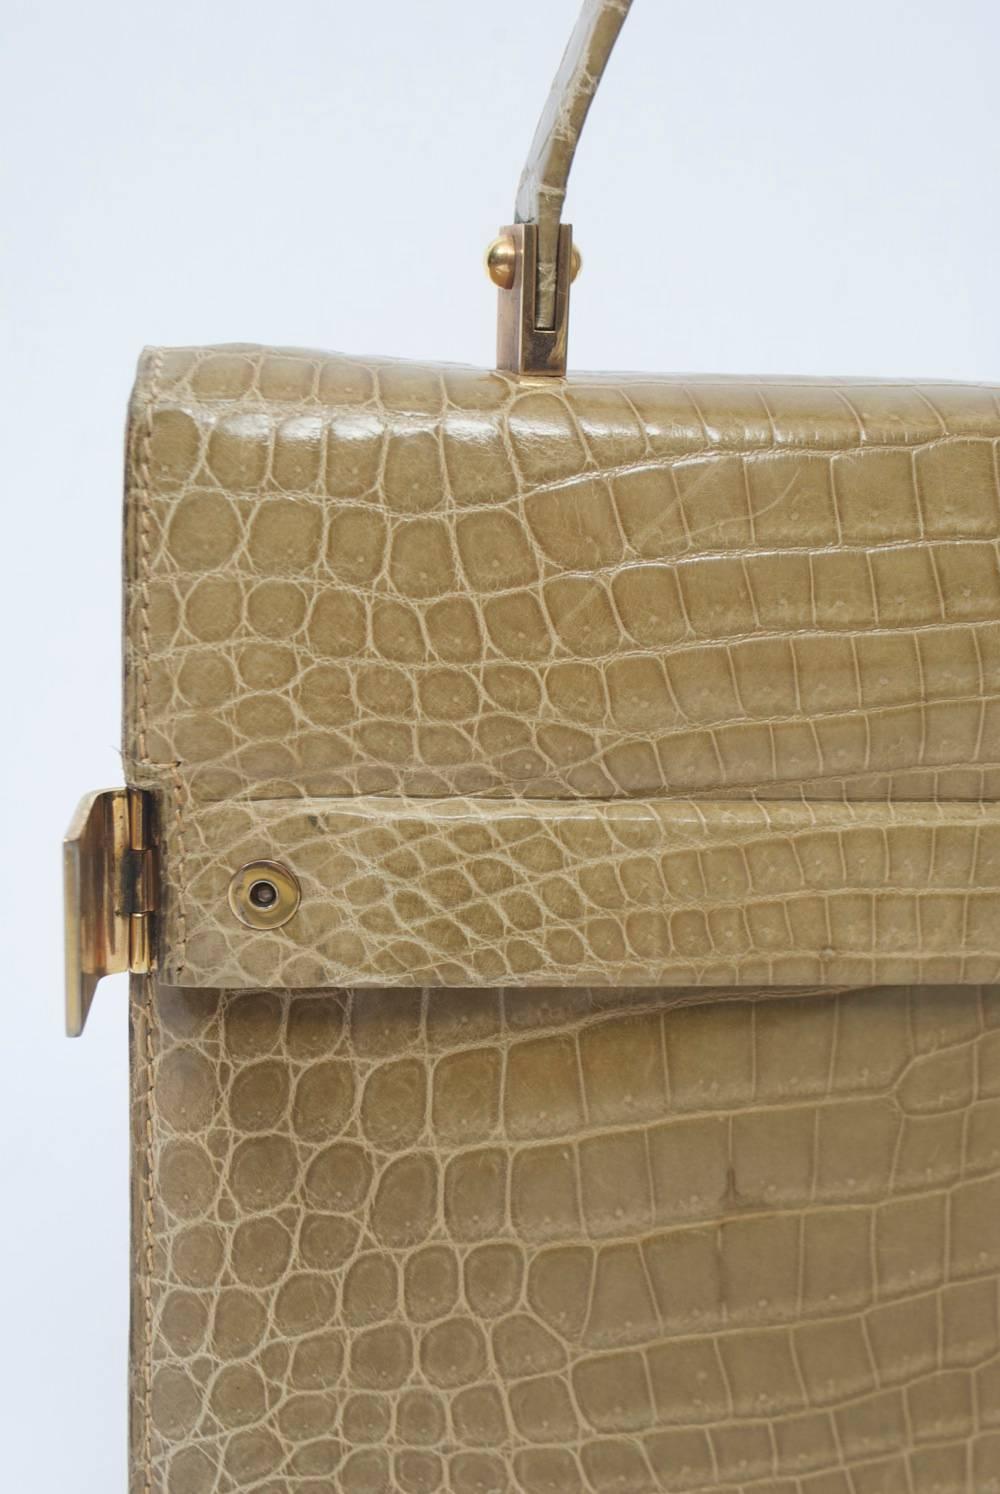 Great size and neutral color define this alligator handbag featuring gold metal clasps on either side of the envelope flap. The single handle is fastened with similar metal braces. On the beige leather interior, there are multiple pockets, including